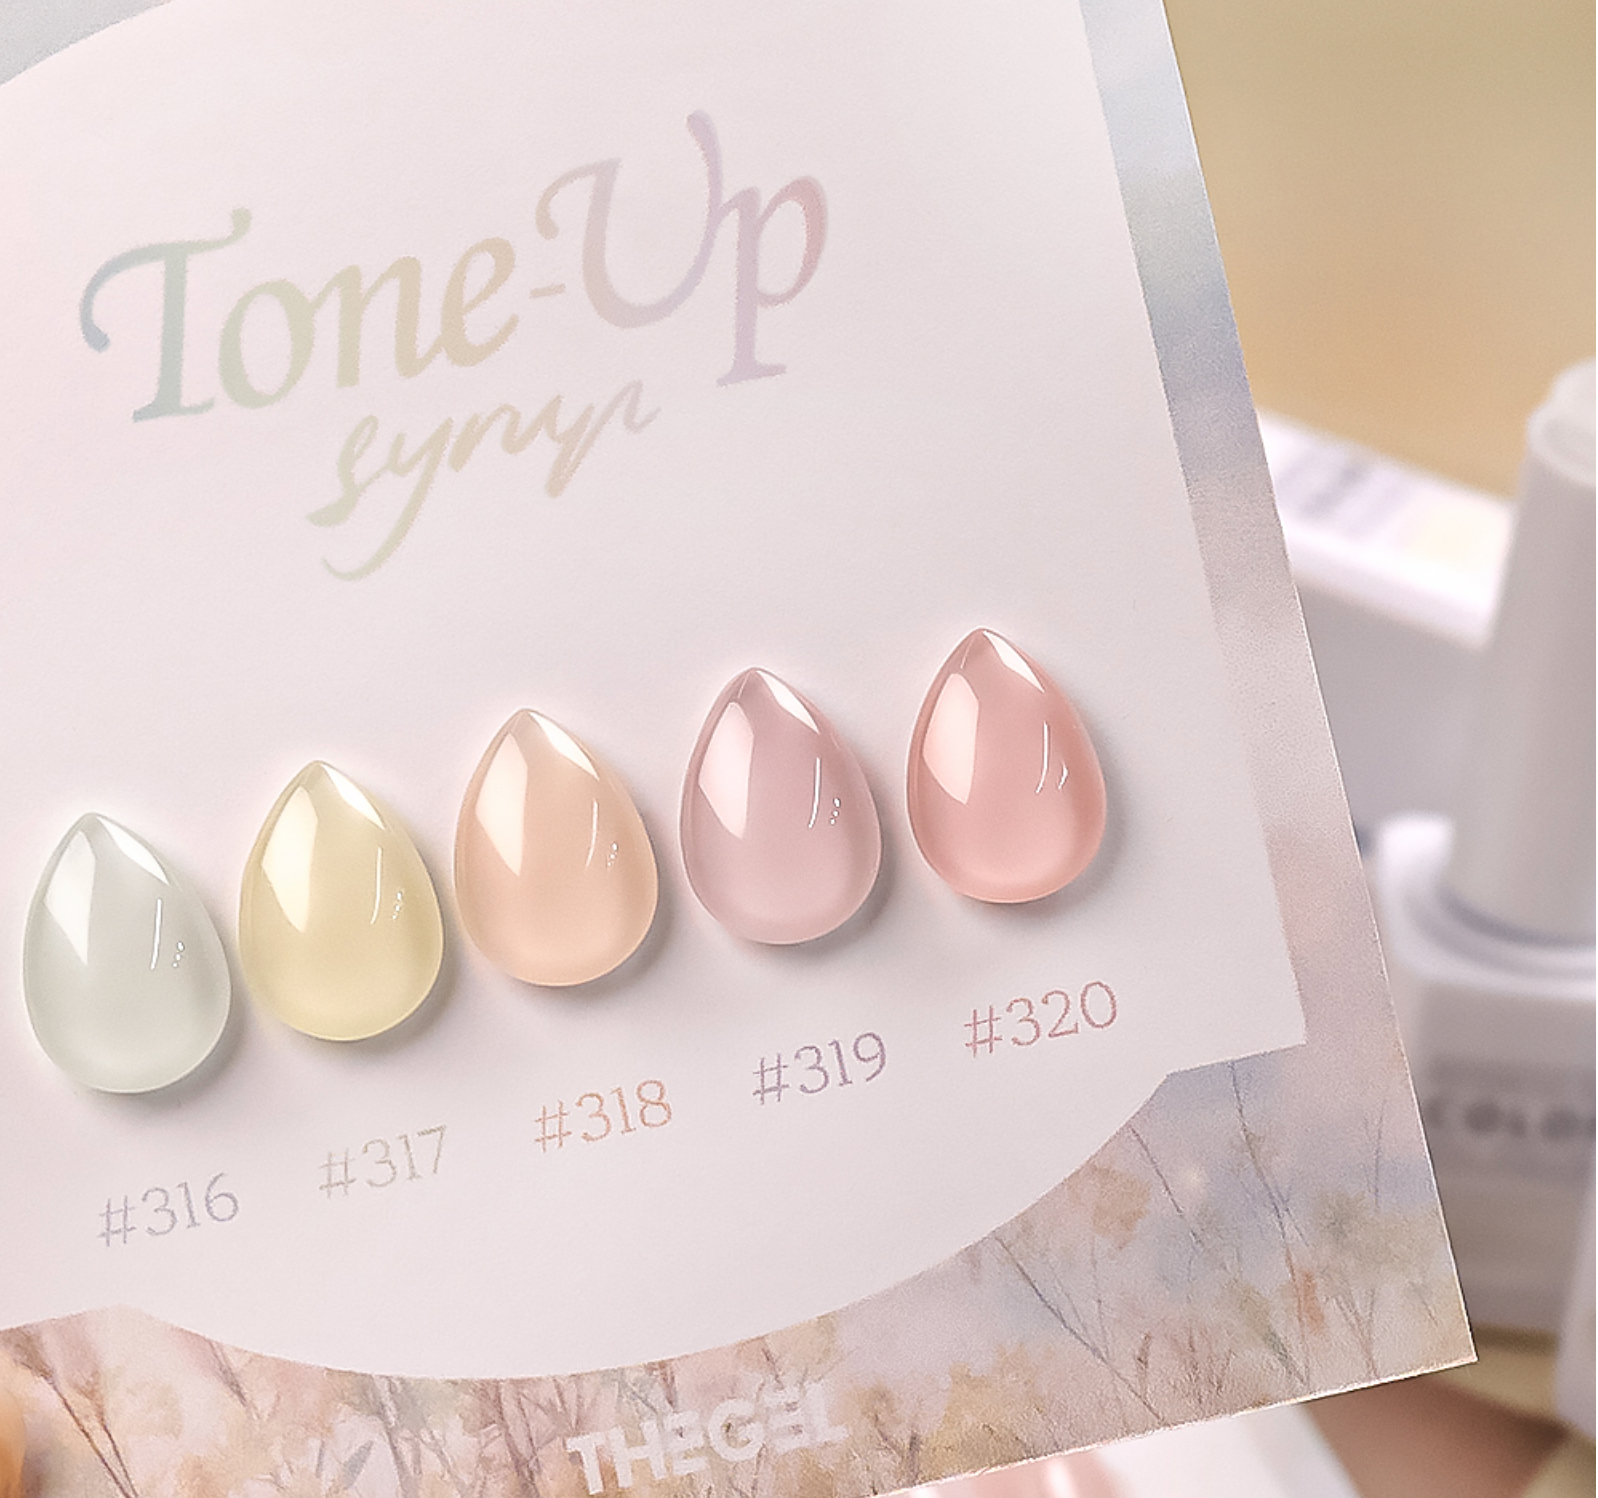 THE GEL Tone up syrup collection